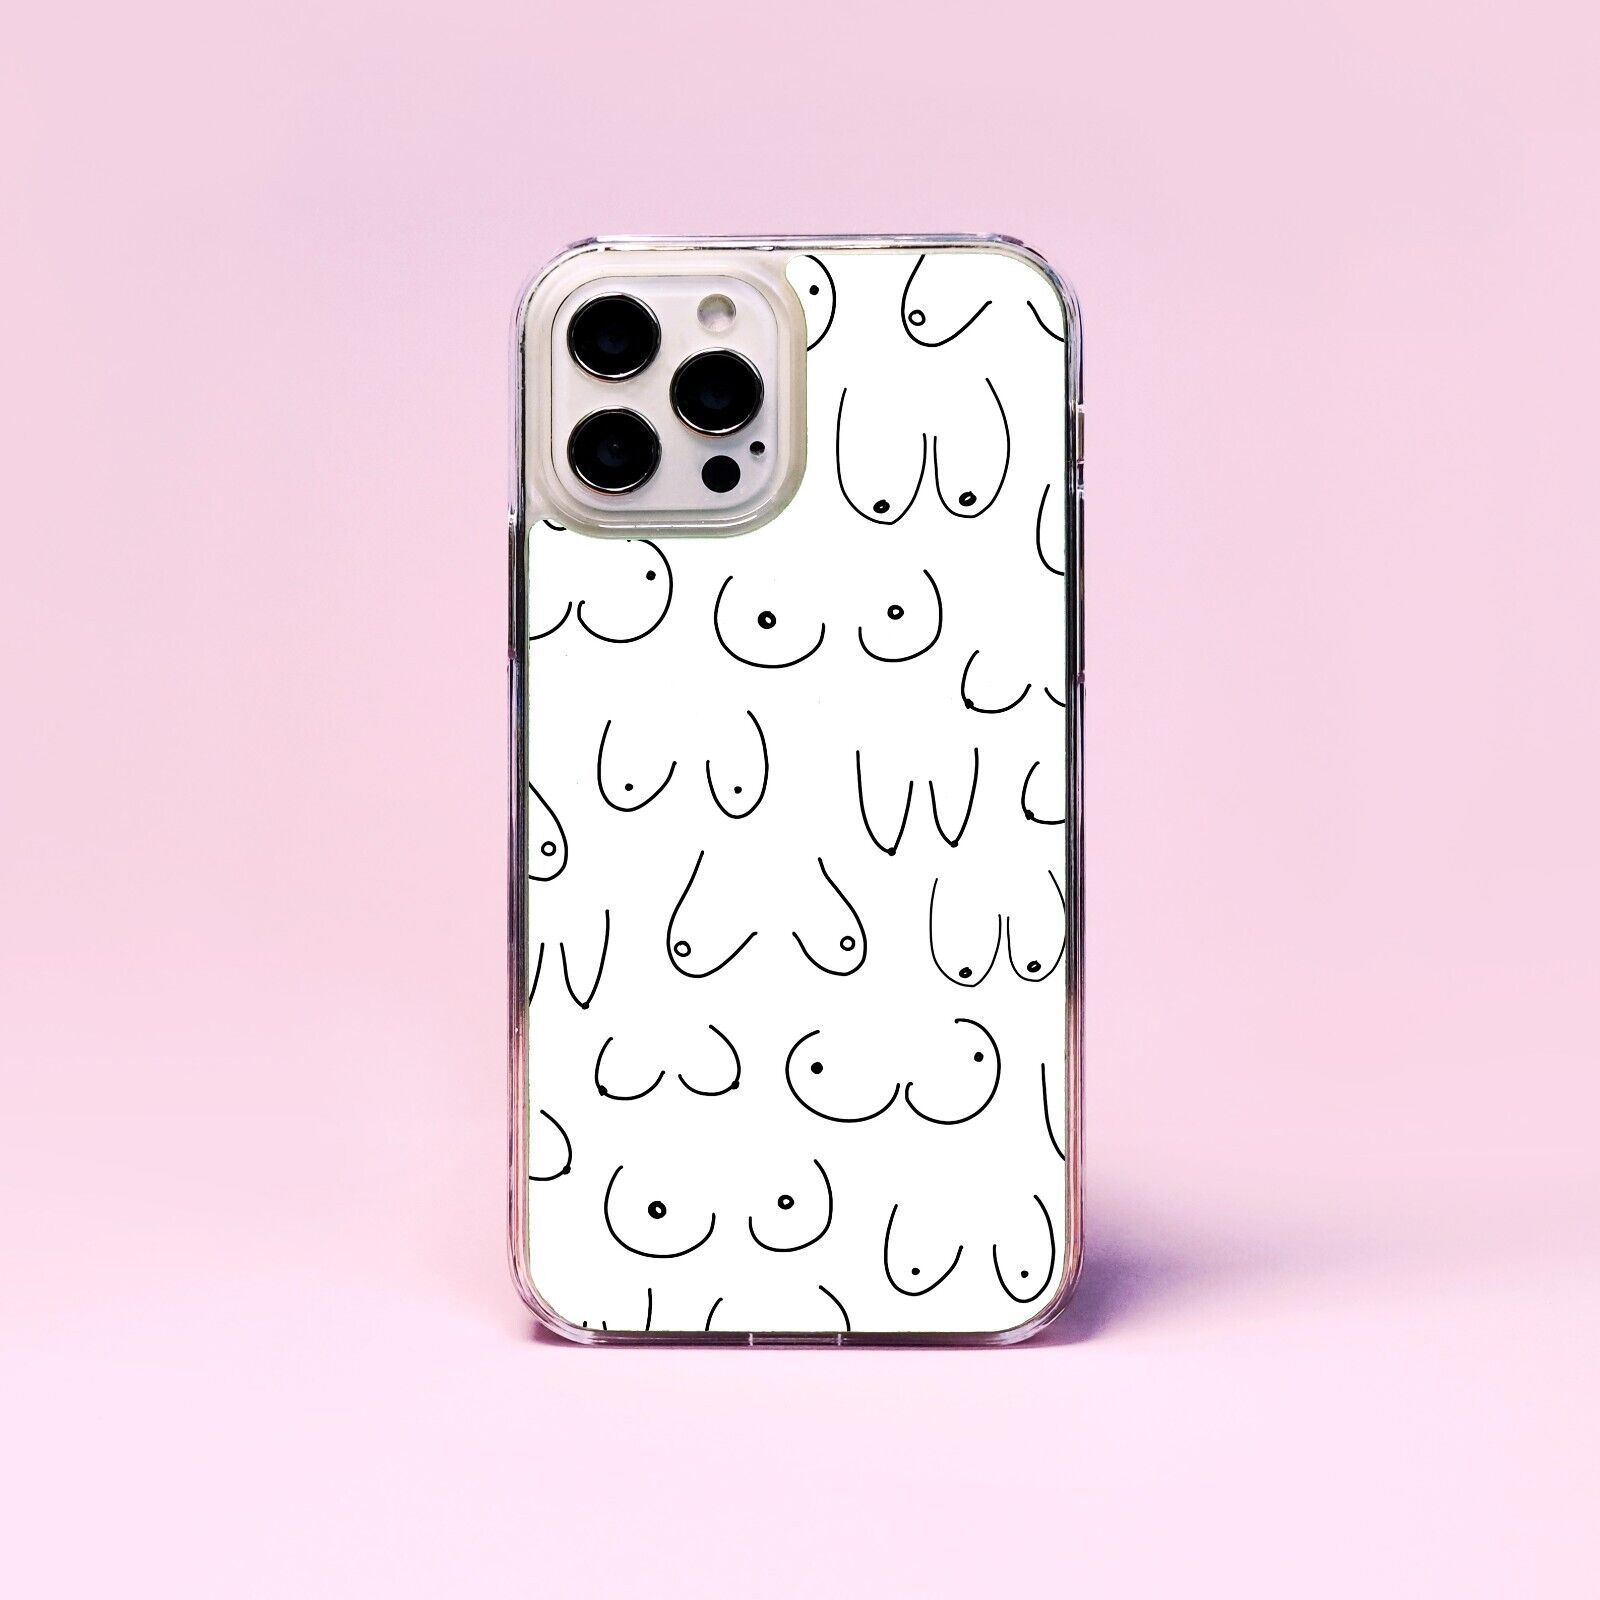 Phone Fashion: Embrace Style with a Boobs Phone Case缩略图